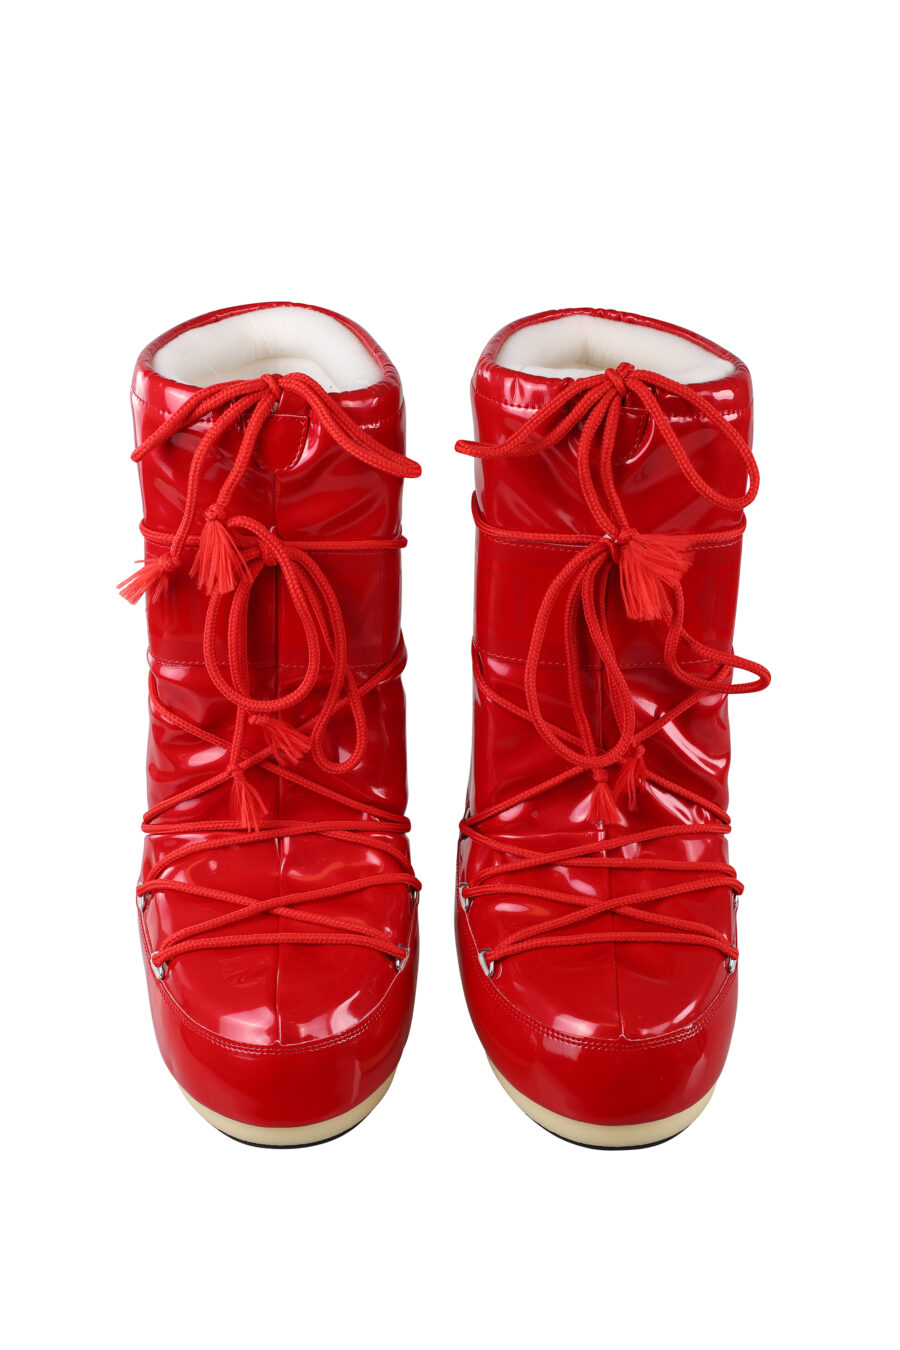 Red snow boots with monochrome logo - IMG 6704